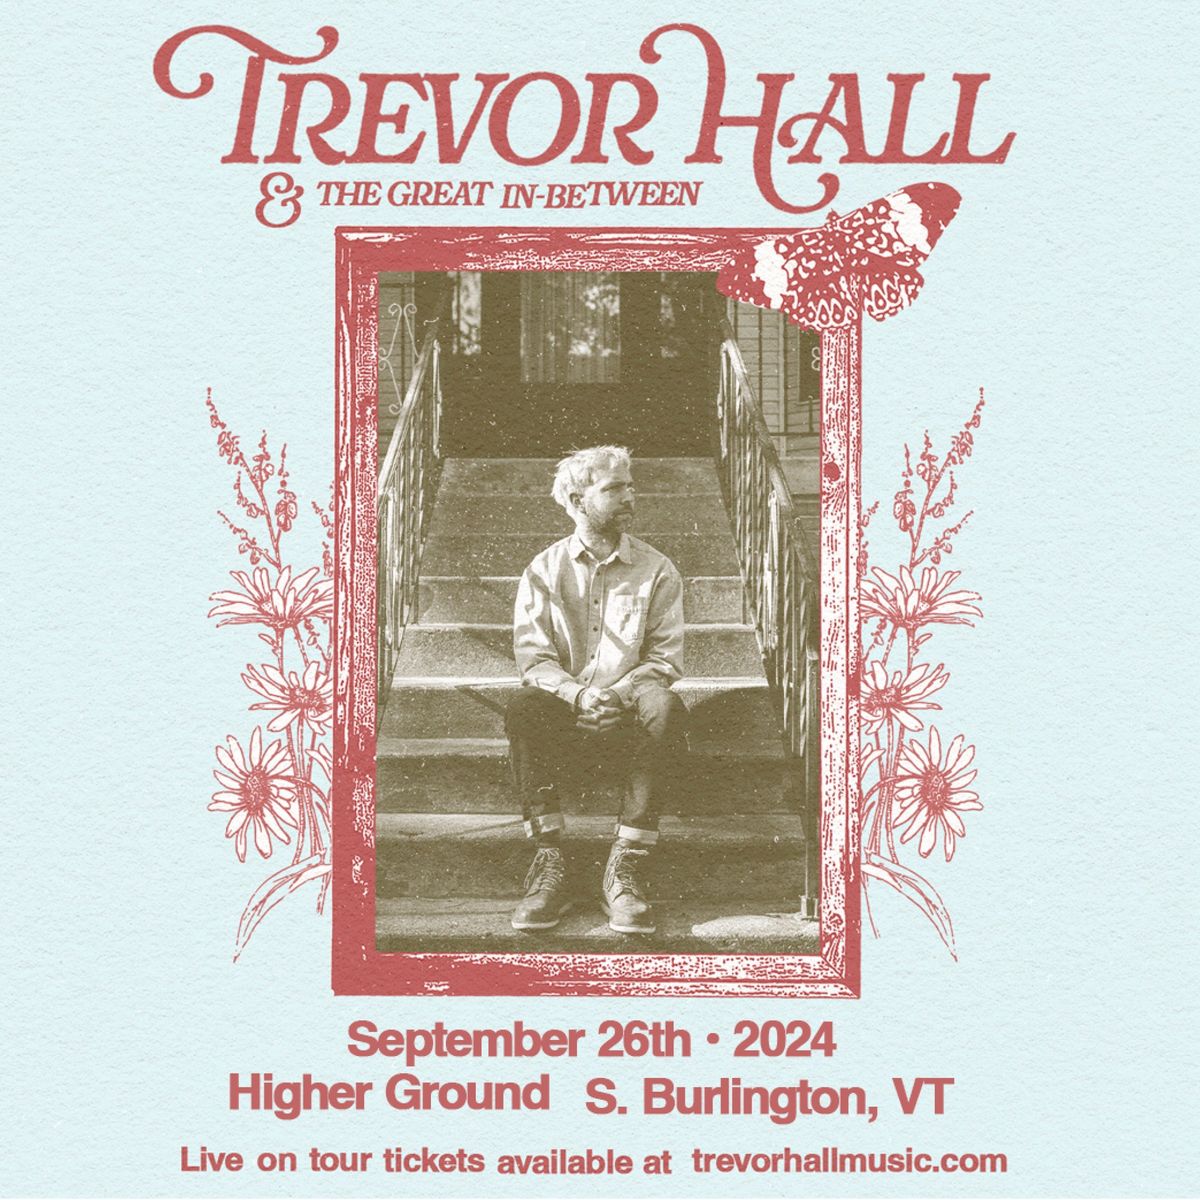 Trevor Hall & The Great In-Between at Higher Ground